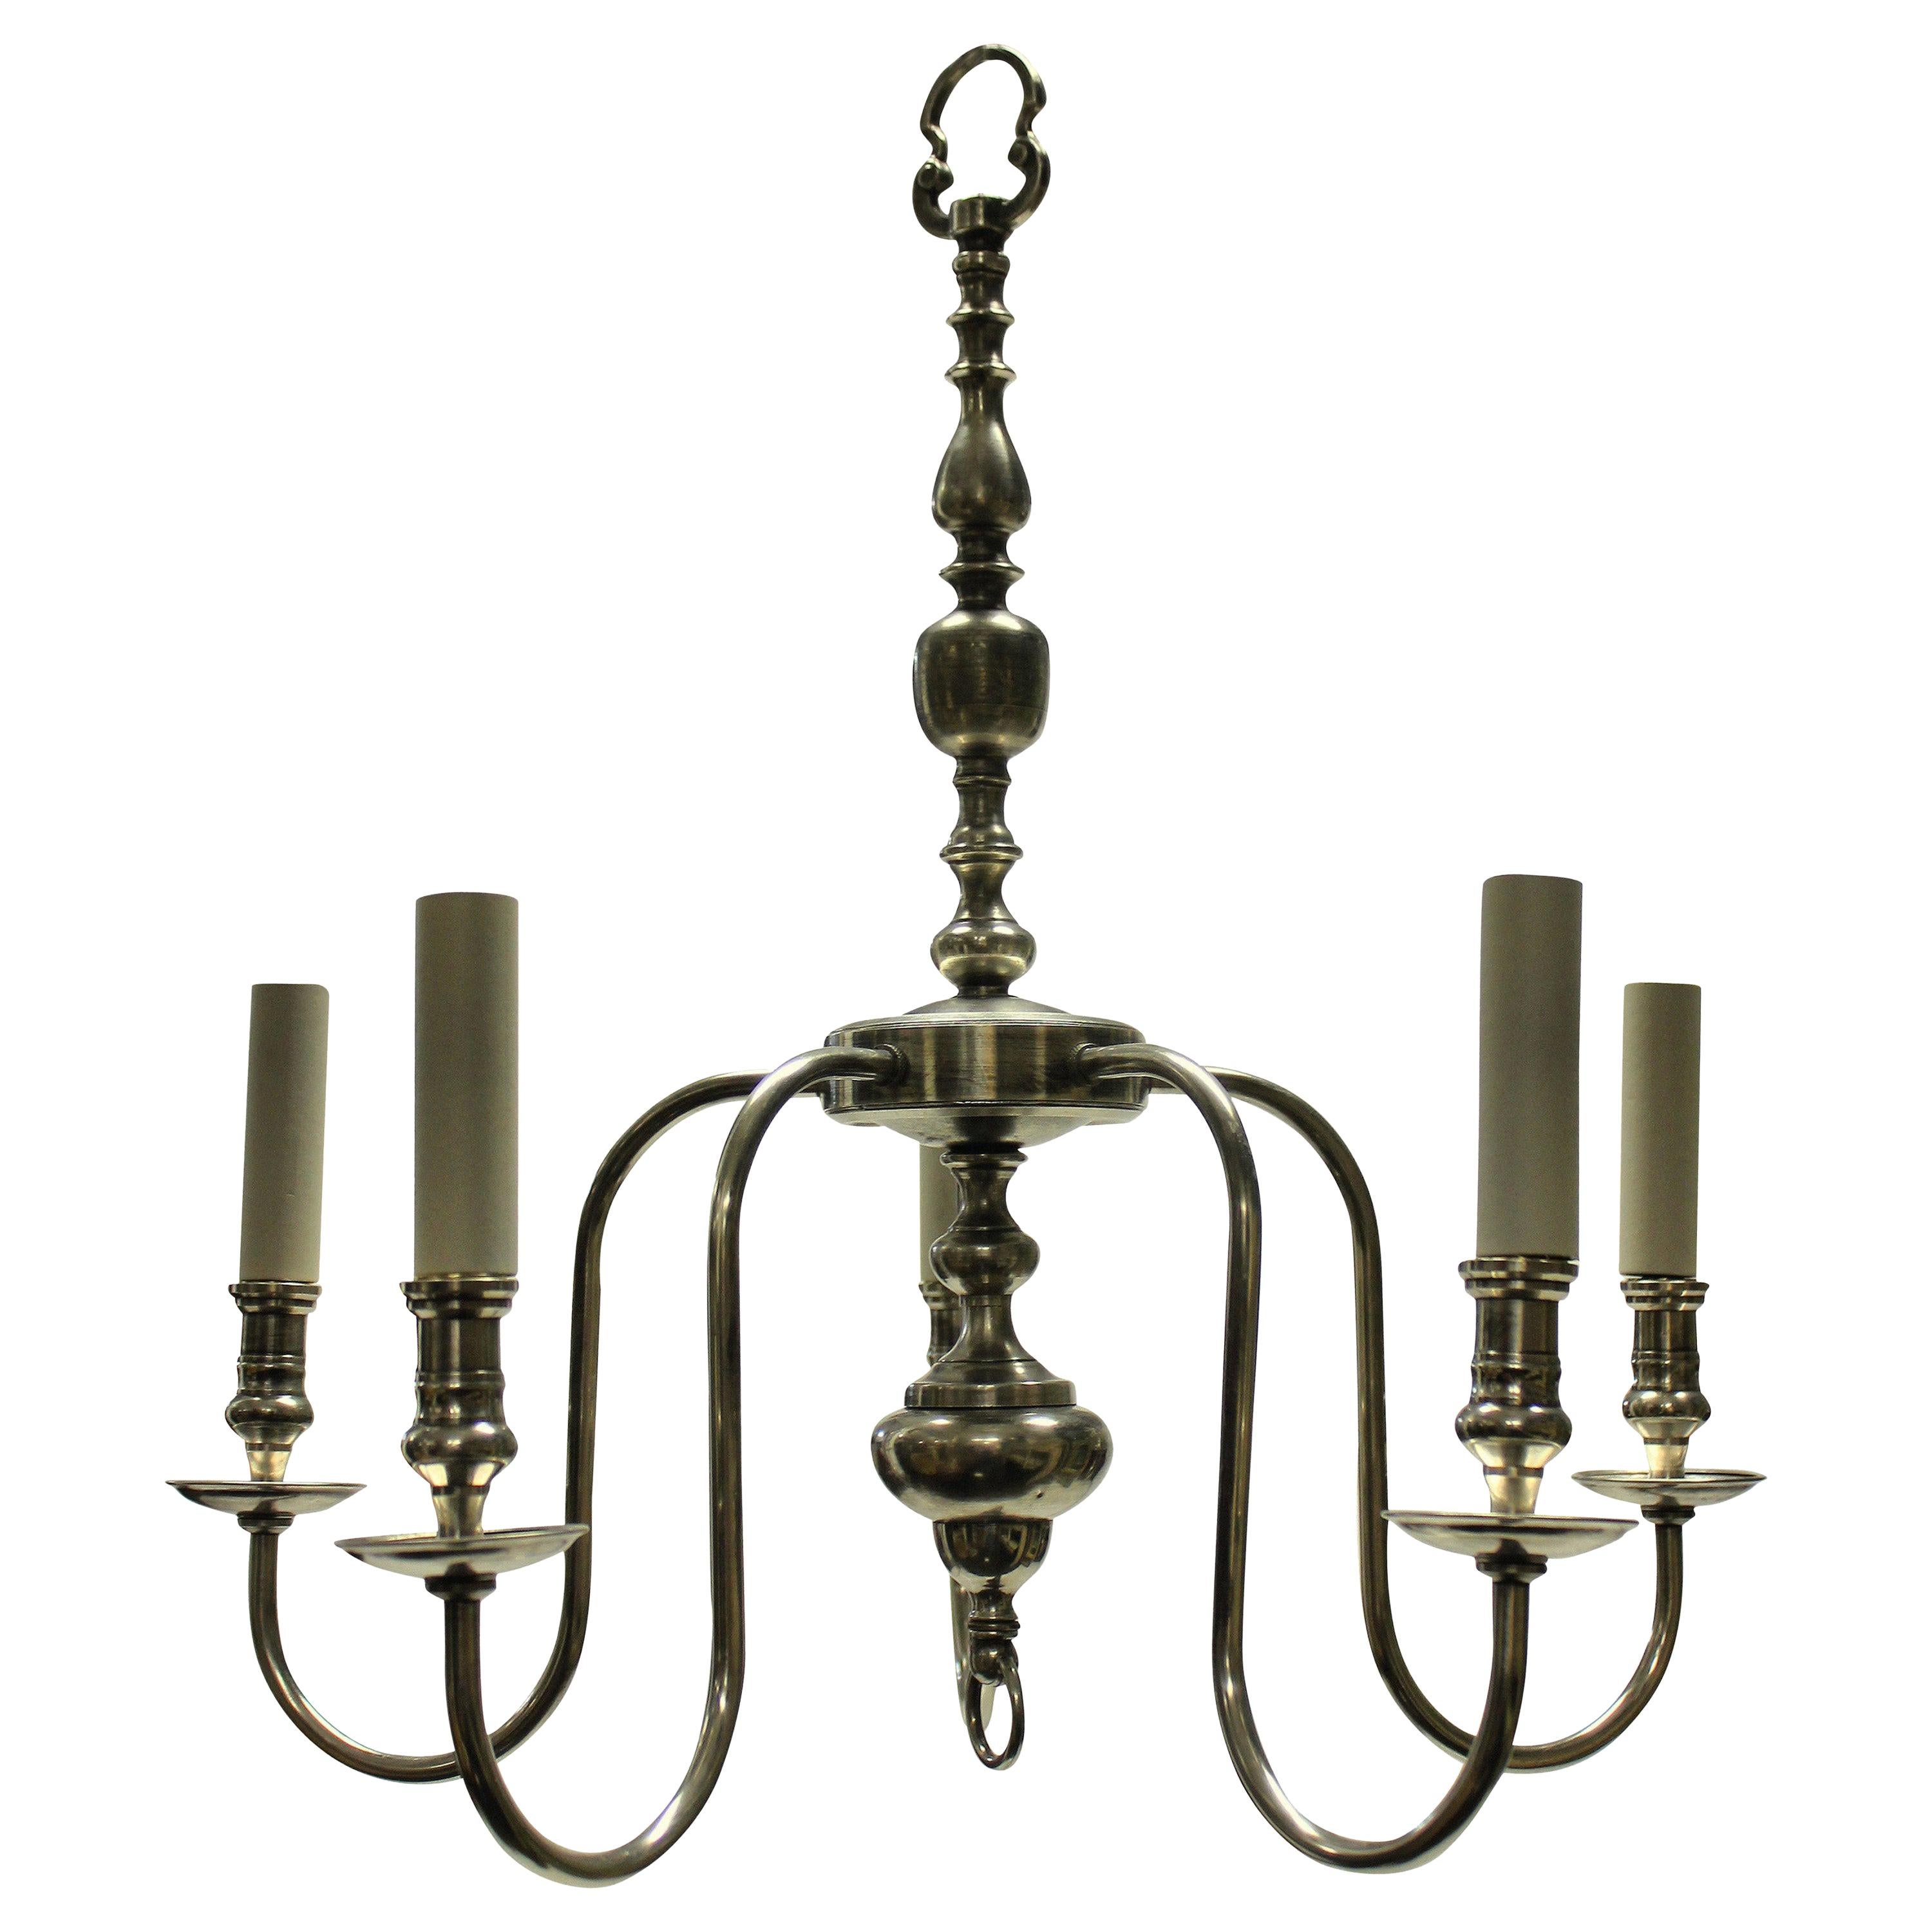 English Silver Plated Chandelier